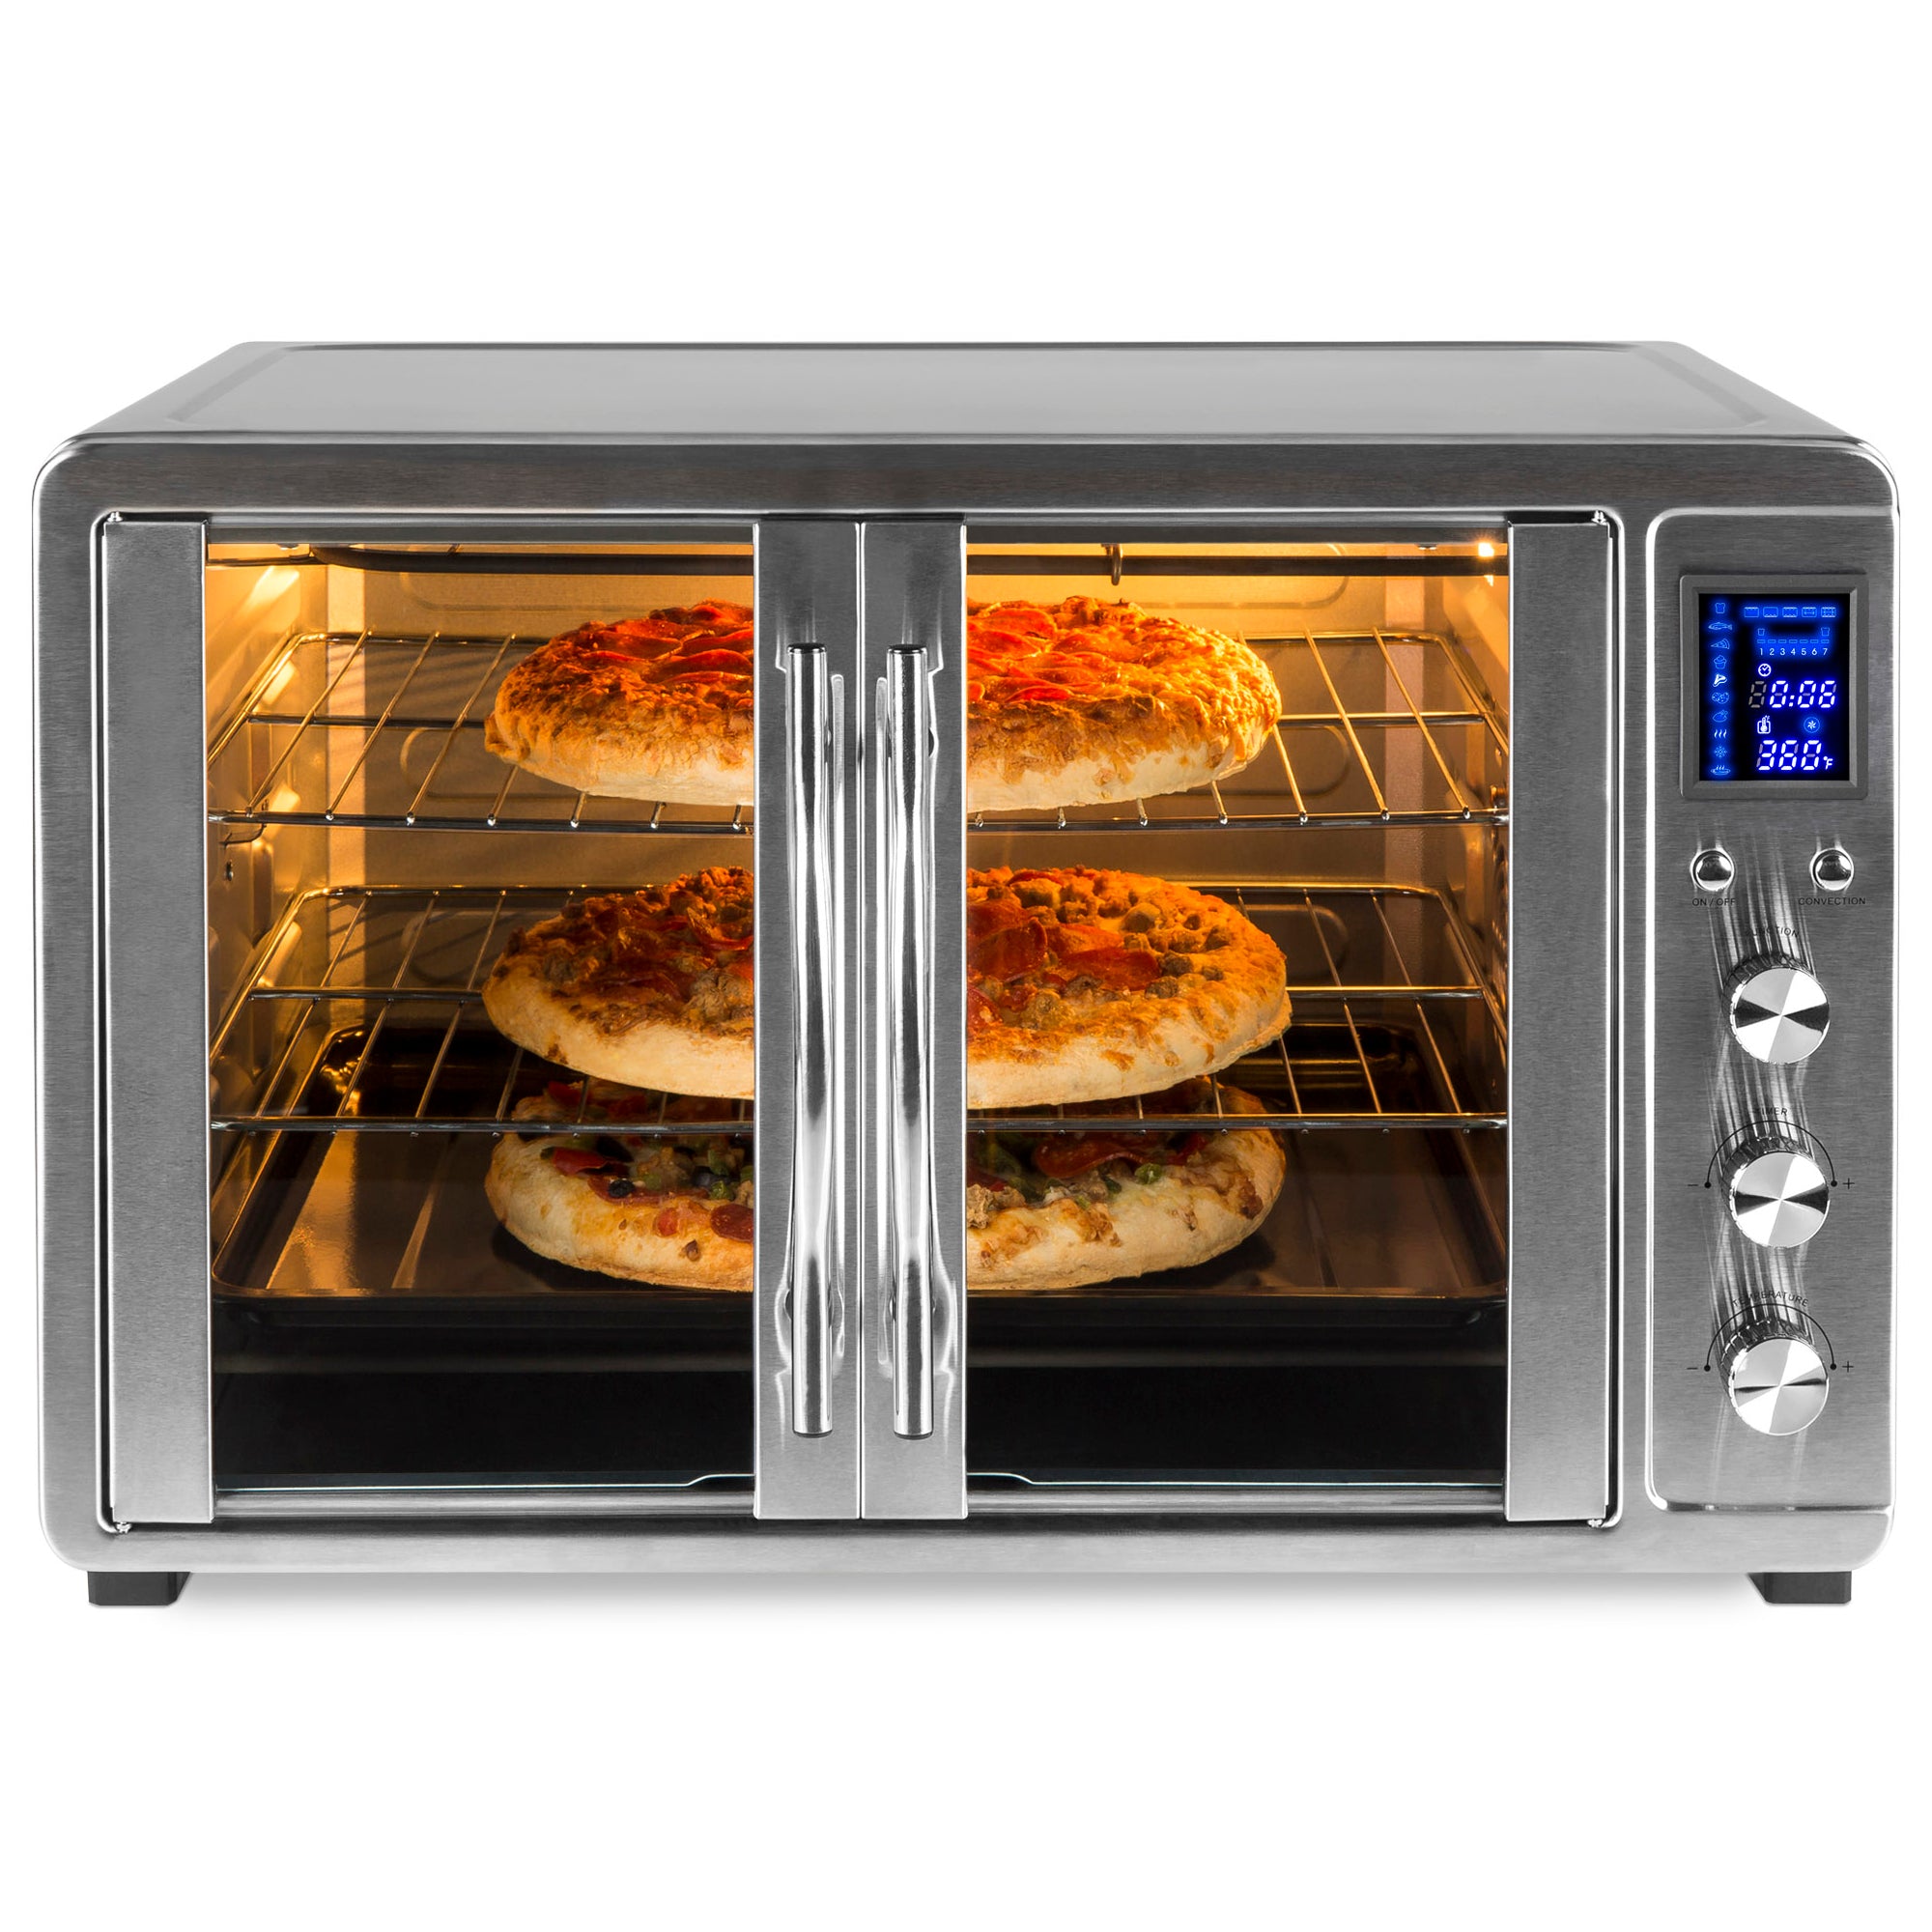 55l 1800w Extra Large Countertop Convection Toaster Oven W French